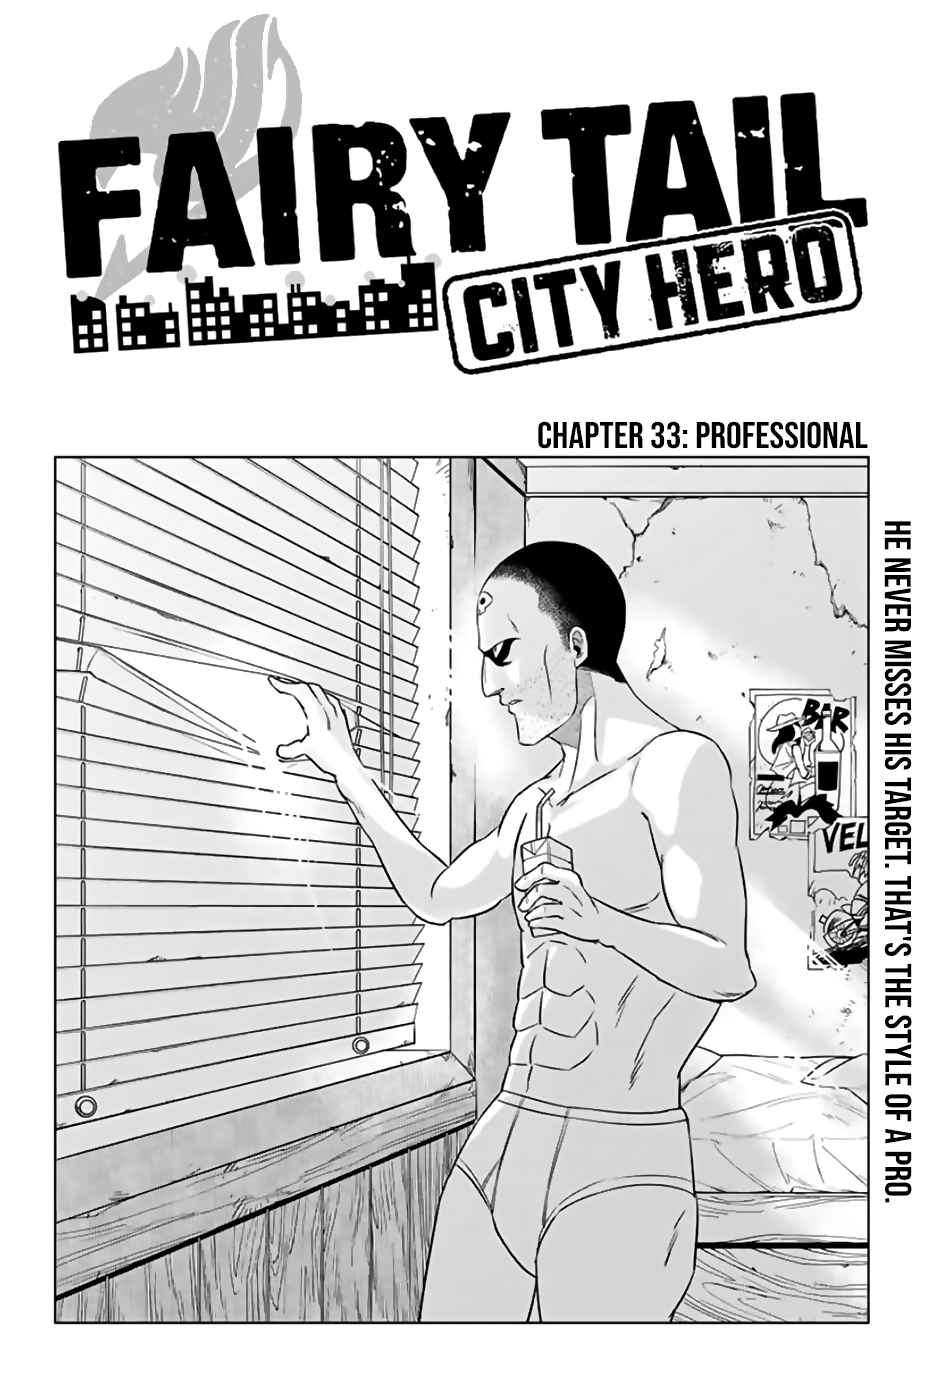 Fairy Tail: City Hero Ch. 33 Professional